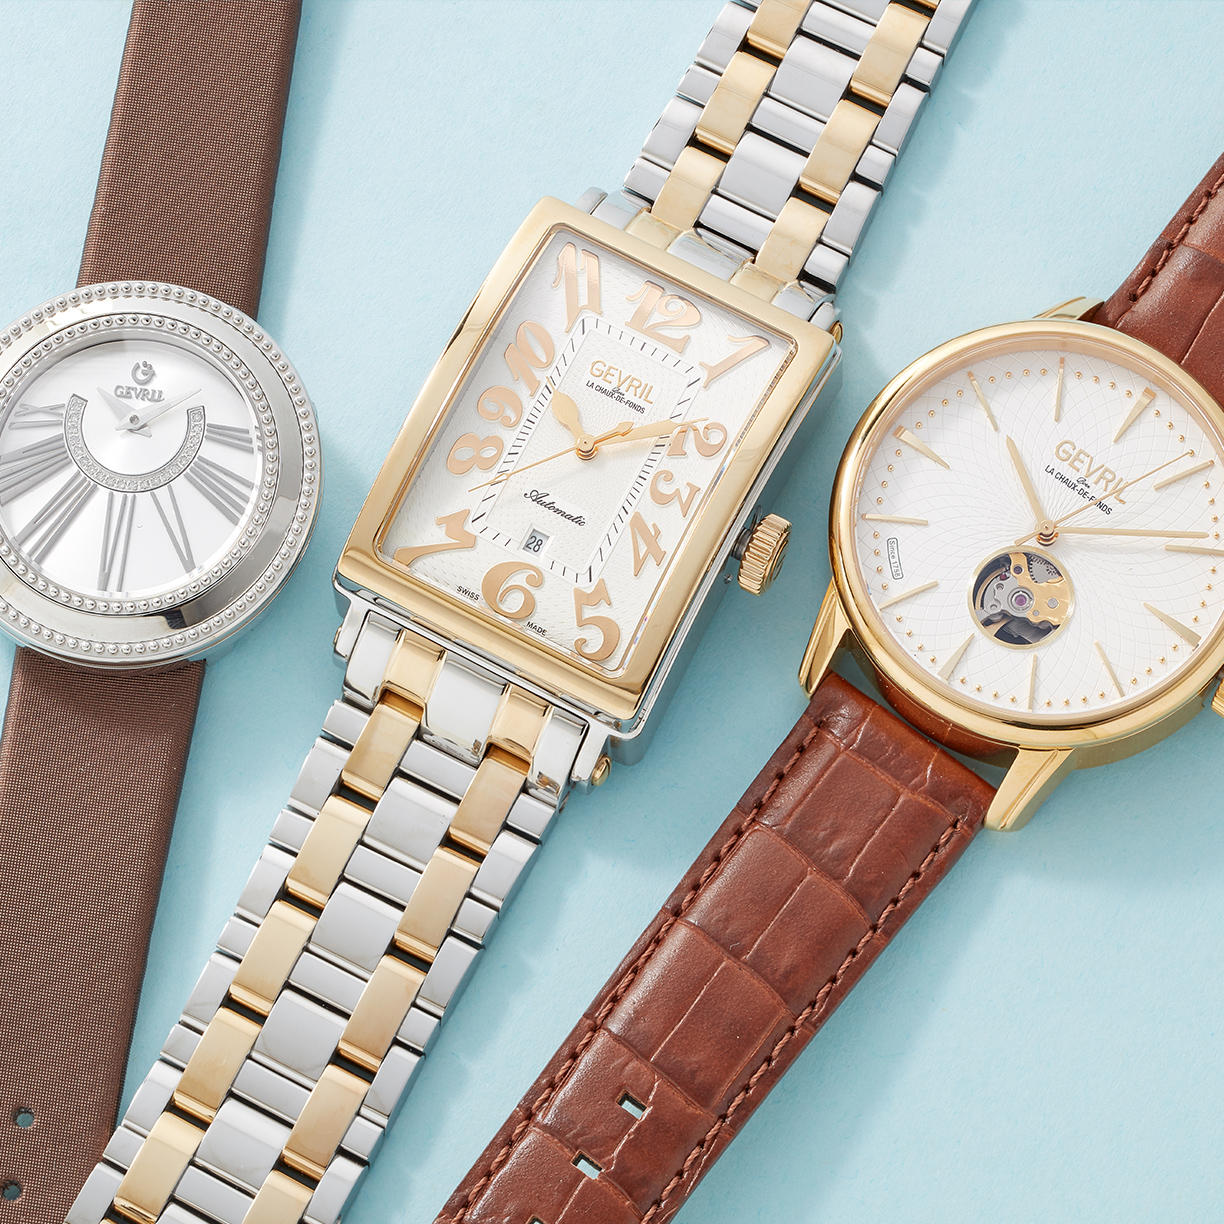 Spring Forward with Watches for All Up to 70% Off